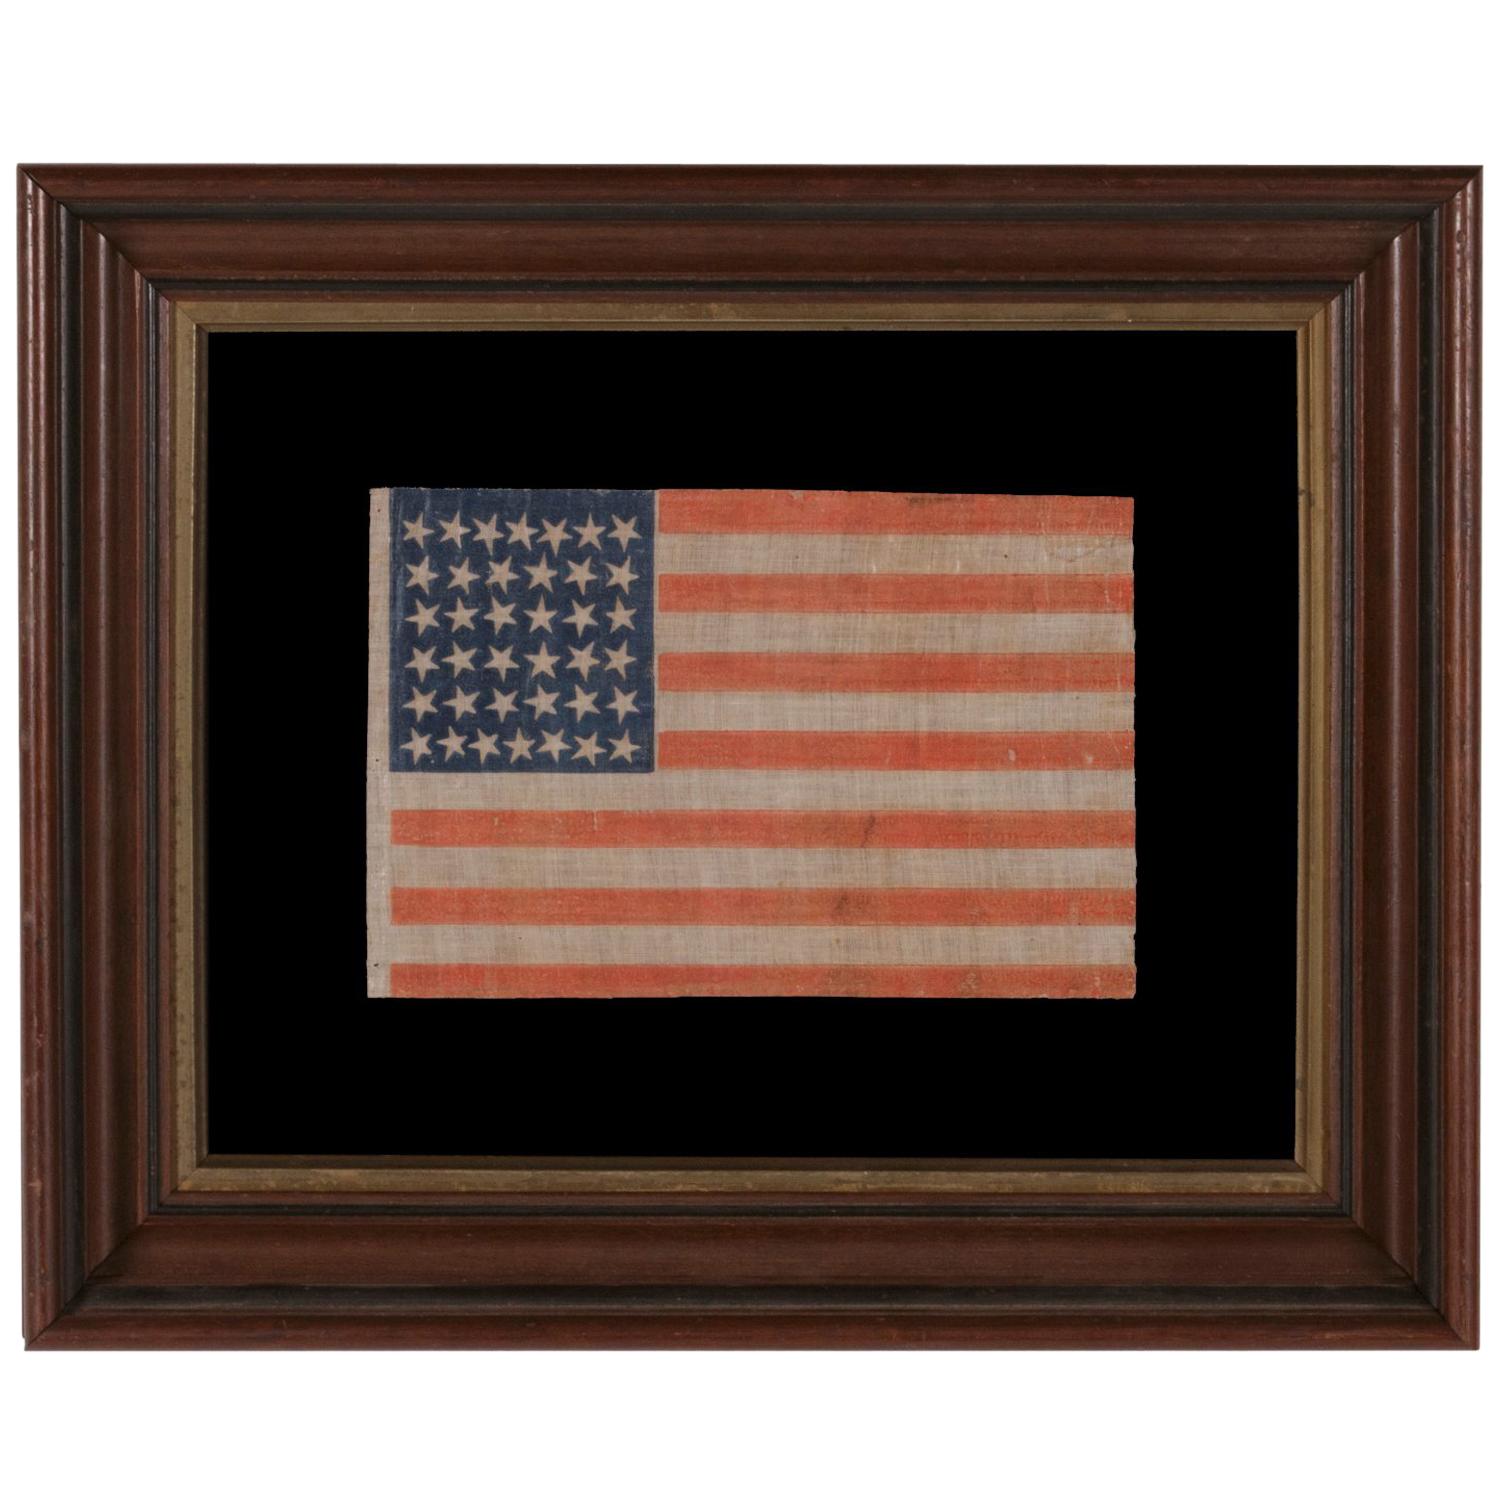 38 Star Antique American Parade Flag with Scattered Star Positioning